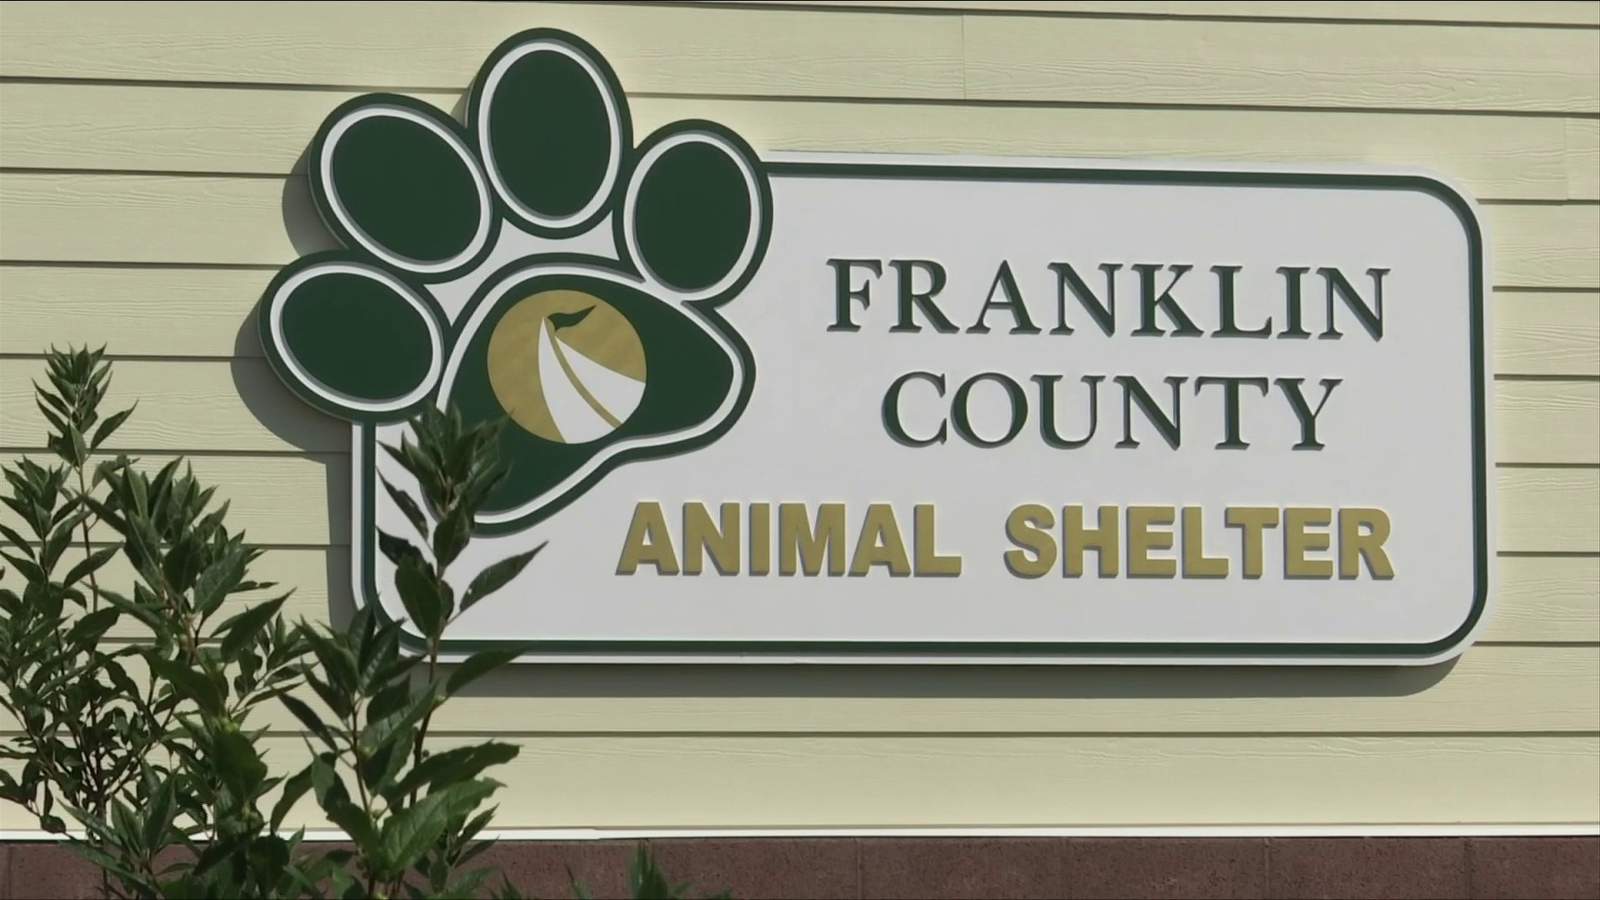 New Franklin County Animal Shelter opens after years of planning